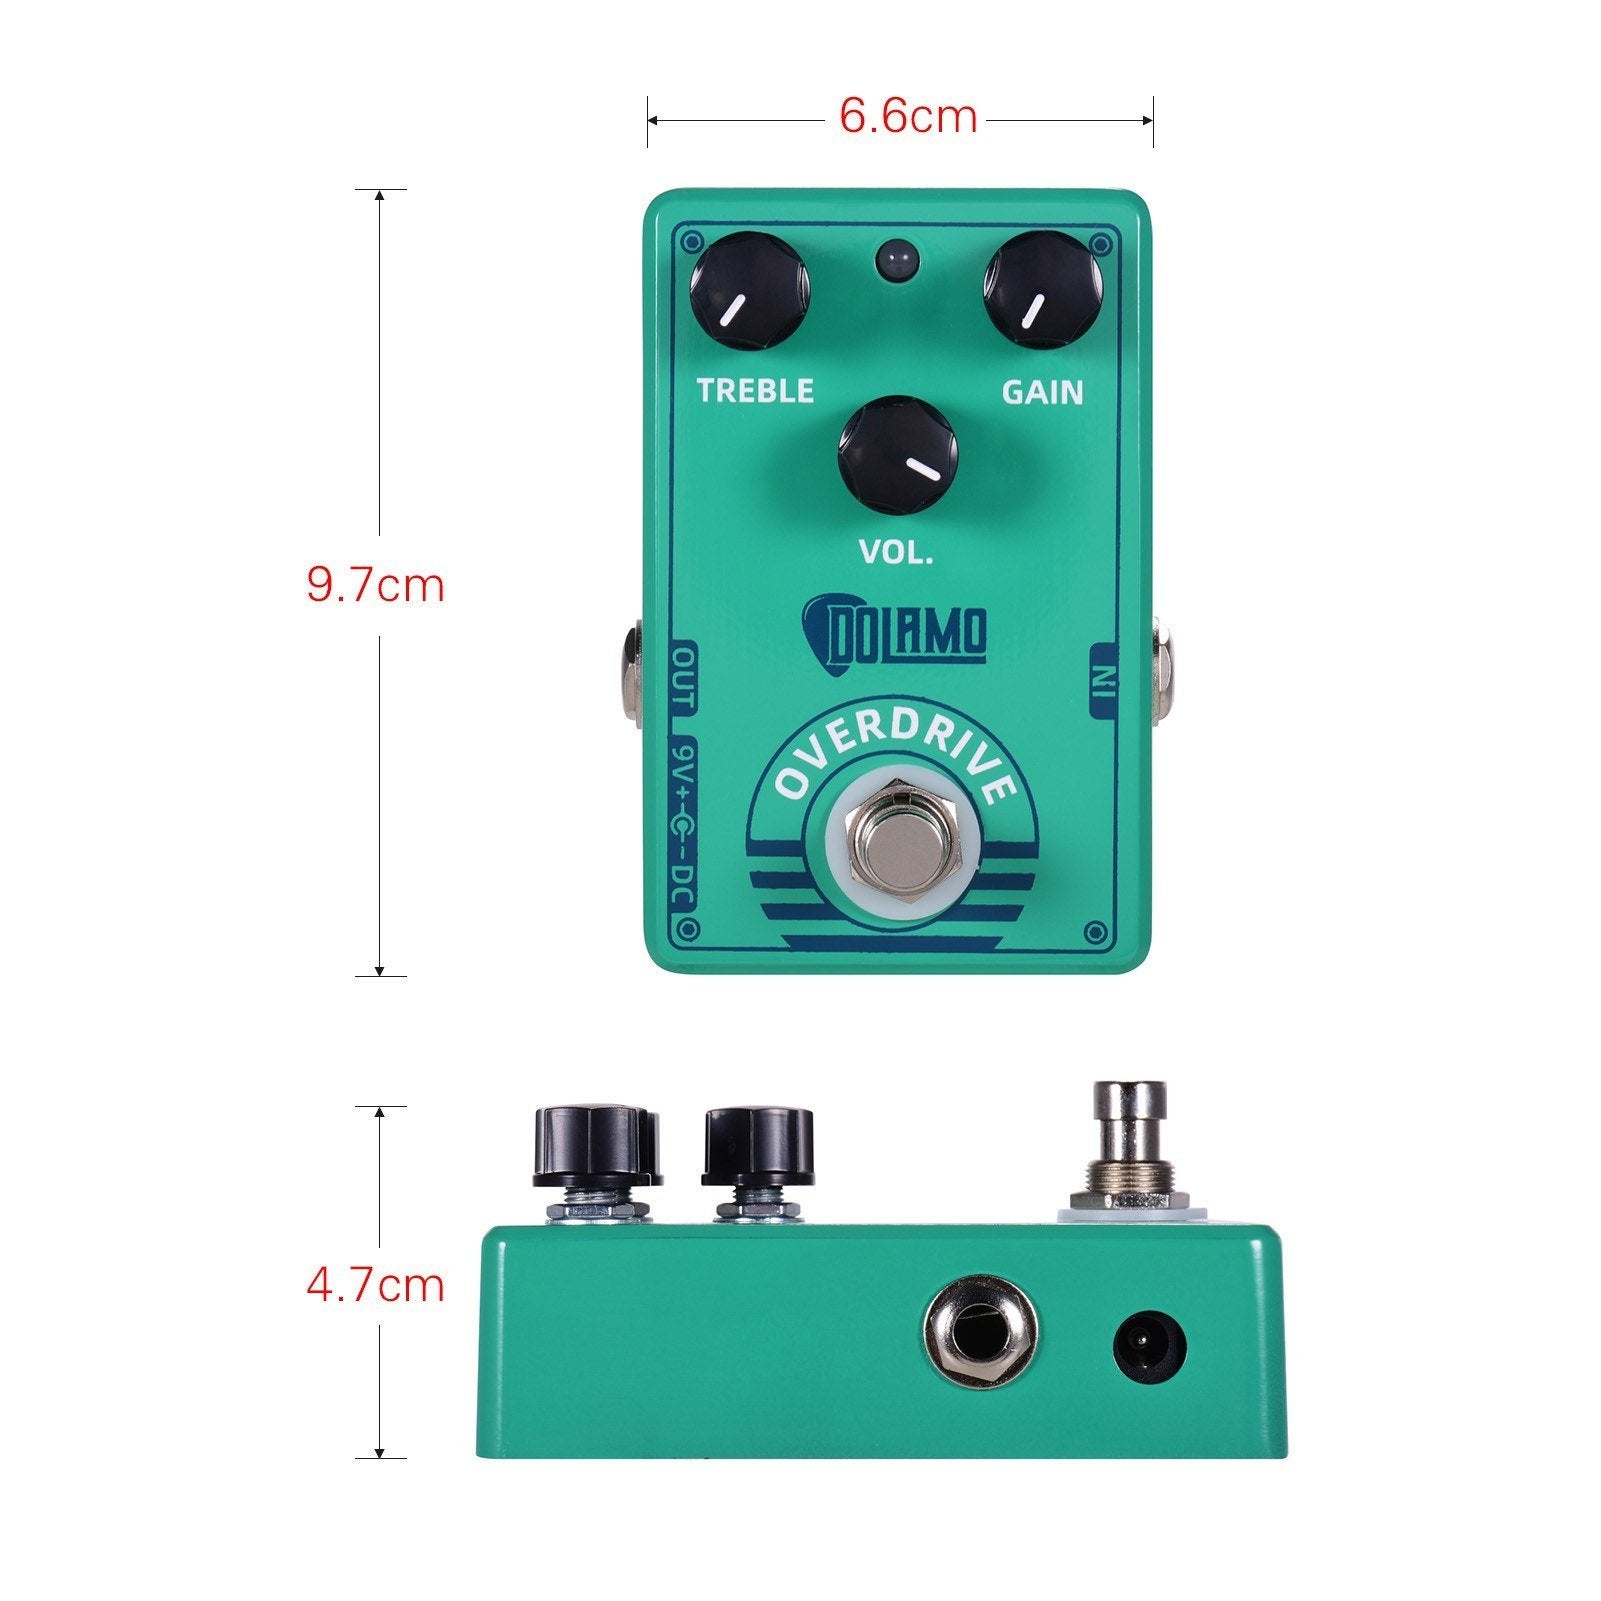 Overdrive Guitar Effect Pedal with Treble Gain Volume Controls True Bypass Design